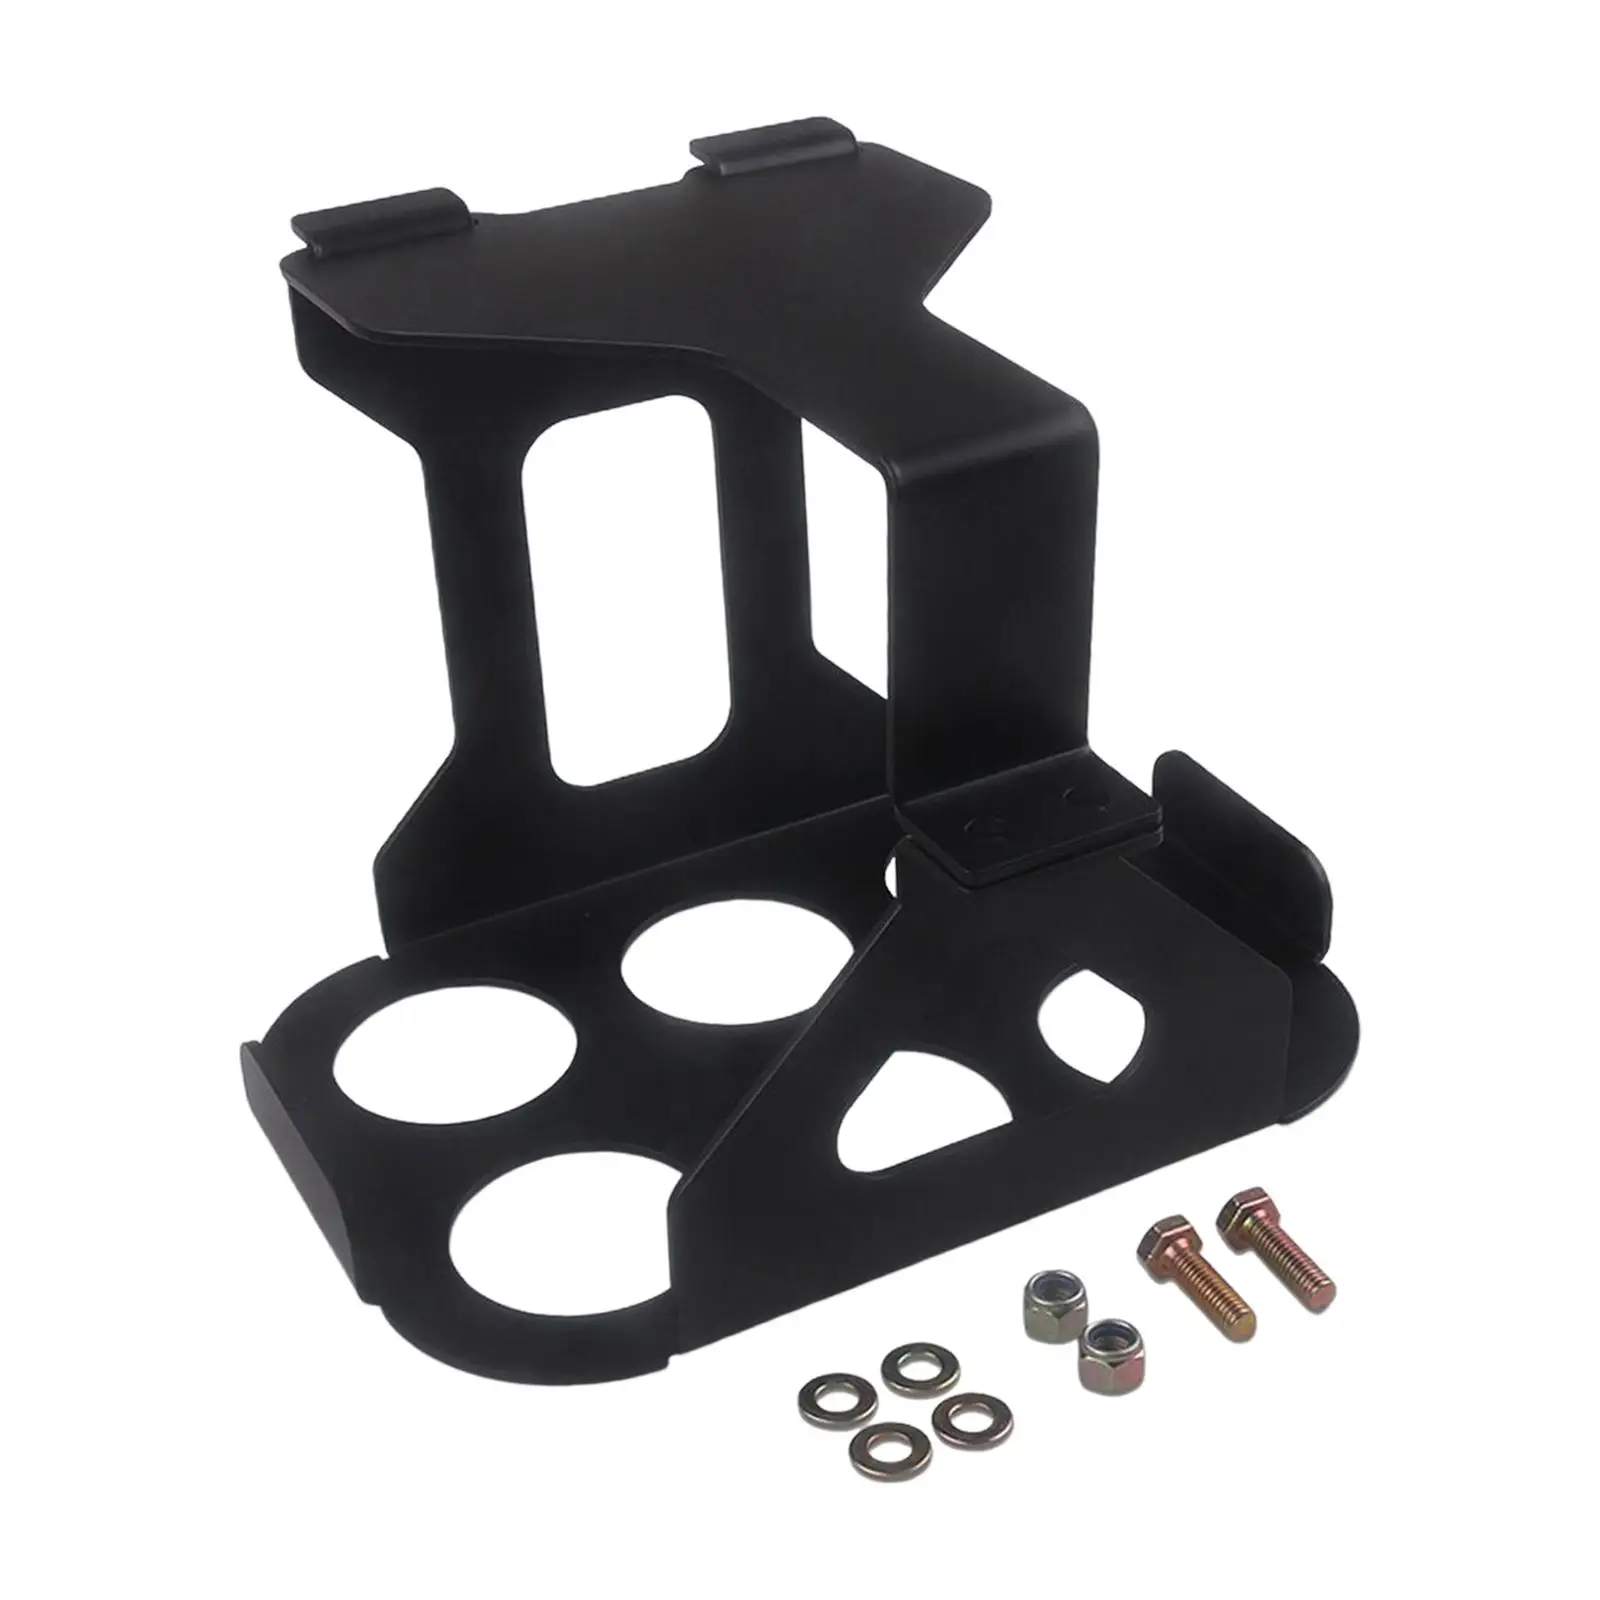 Black Battery Box Tray Easy Installation Durable Metal Truck Battery Mount for